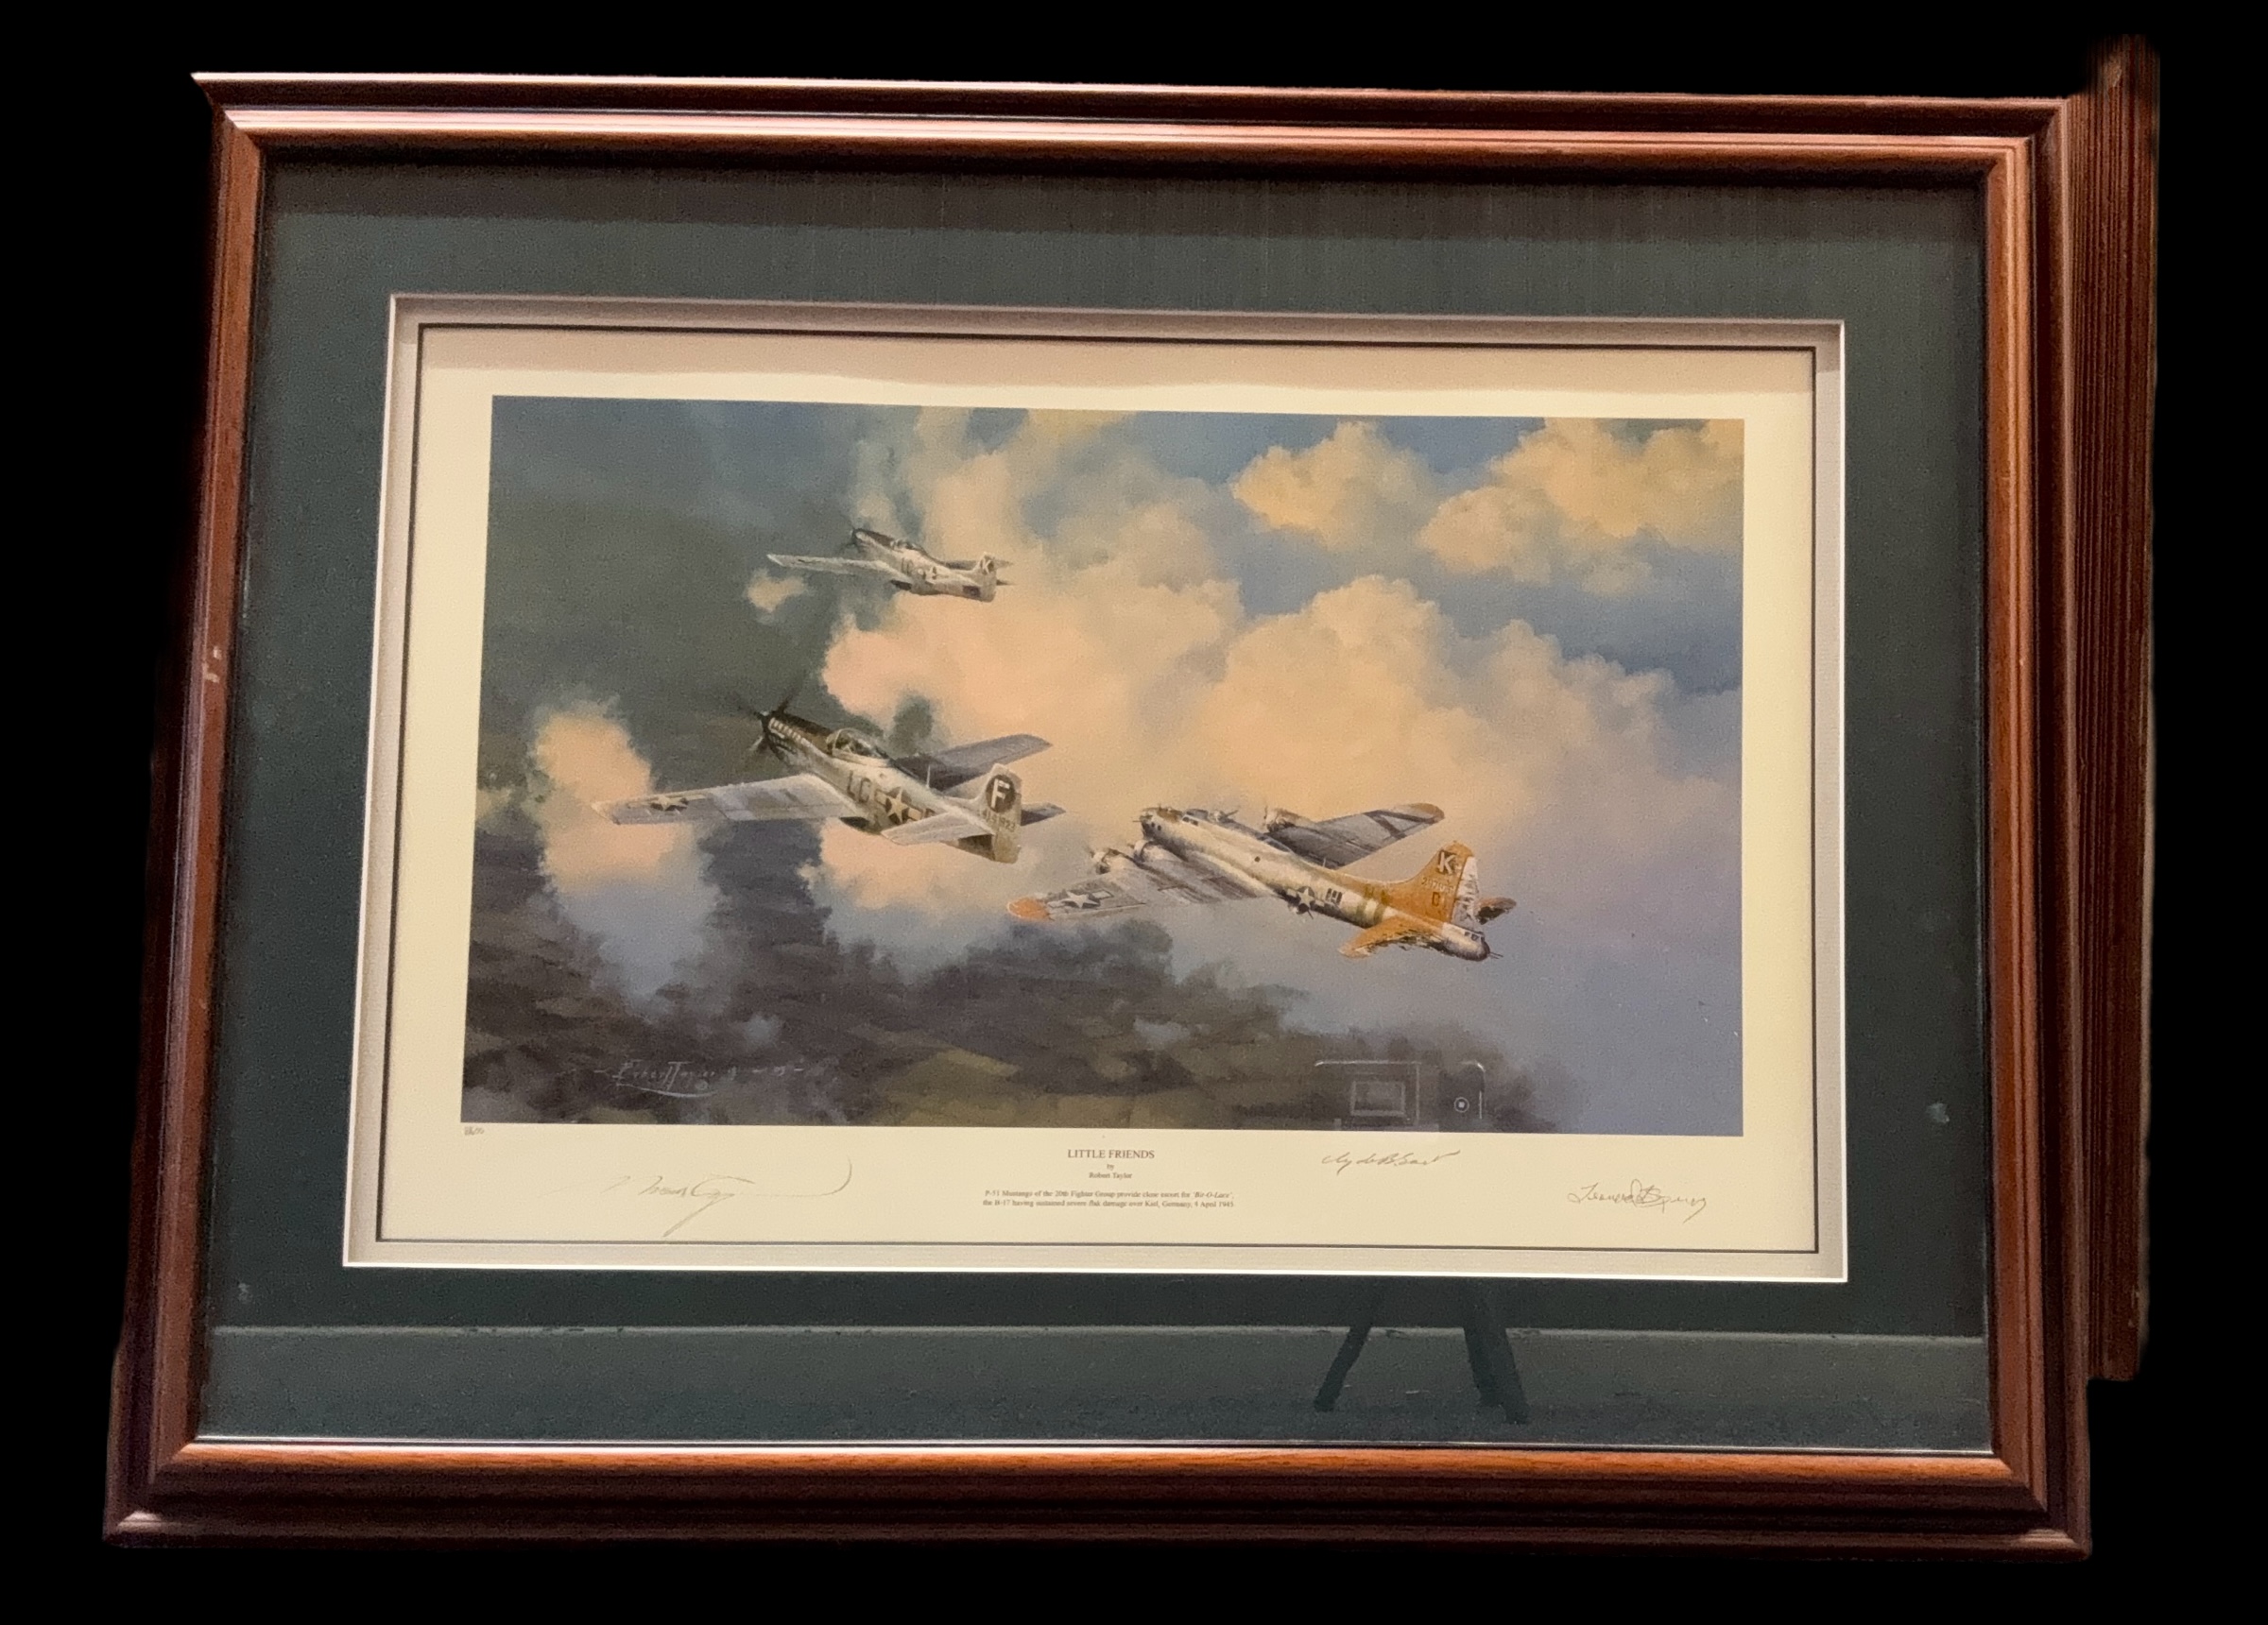 Little Friends WWII print 32x24 inch framed and mounted signed in pencil by the artist Robert - Image 2 of 3